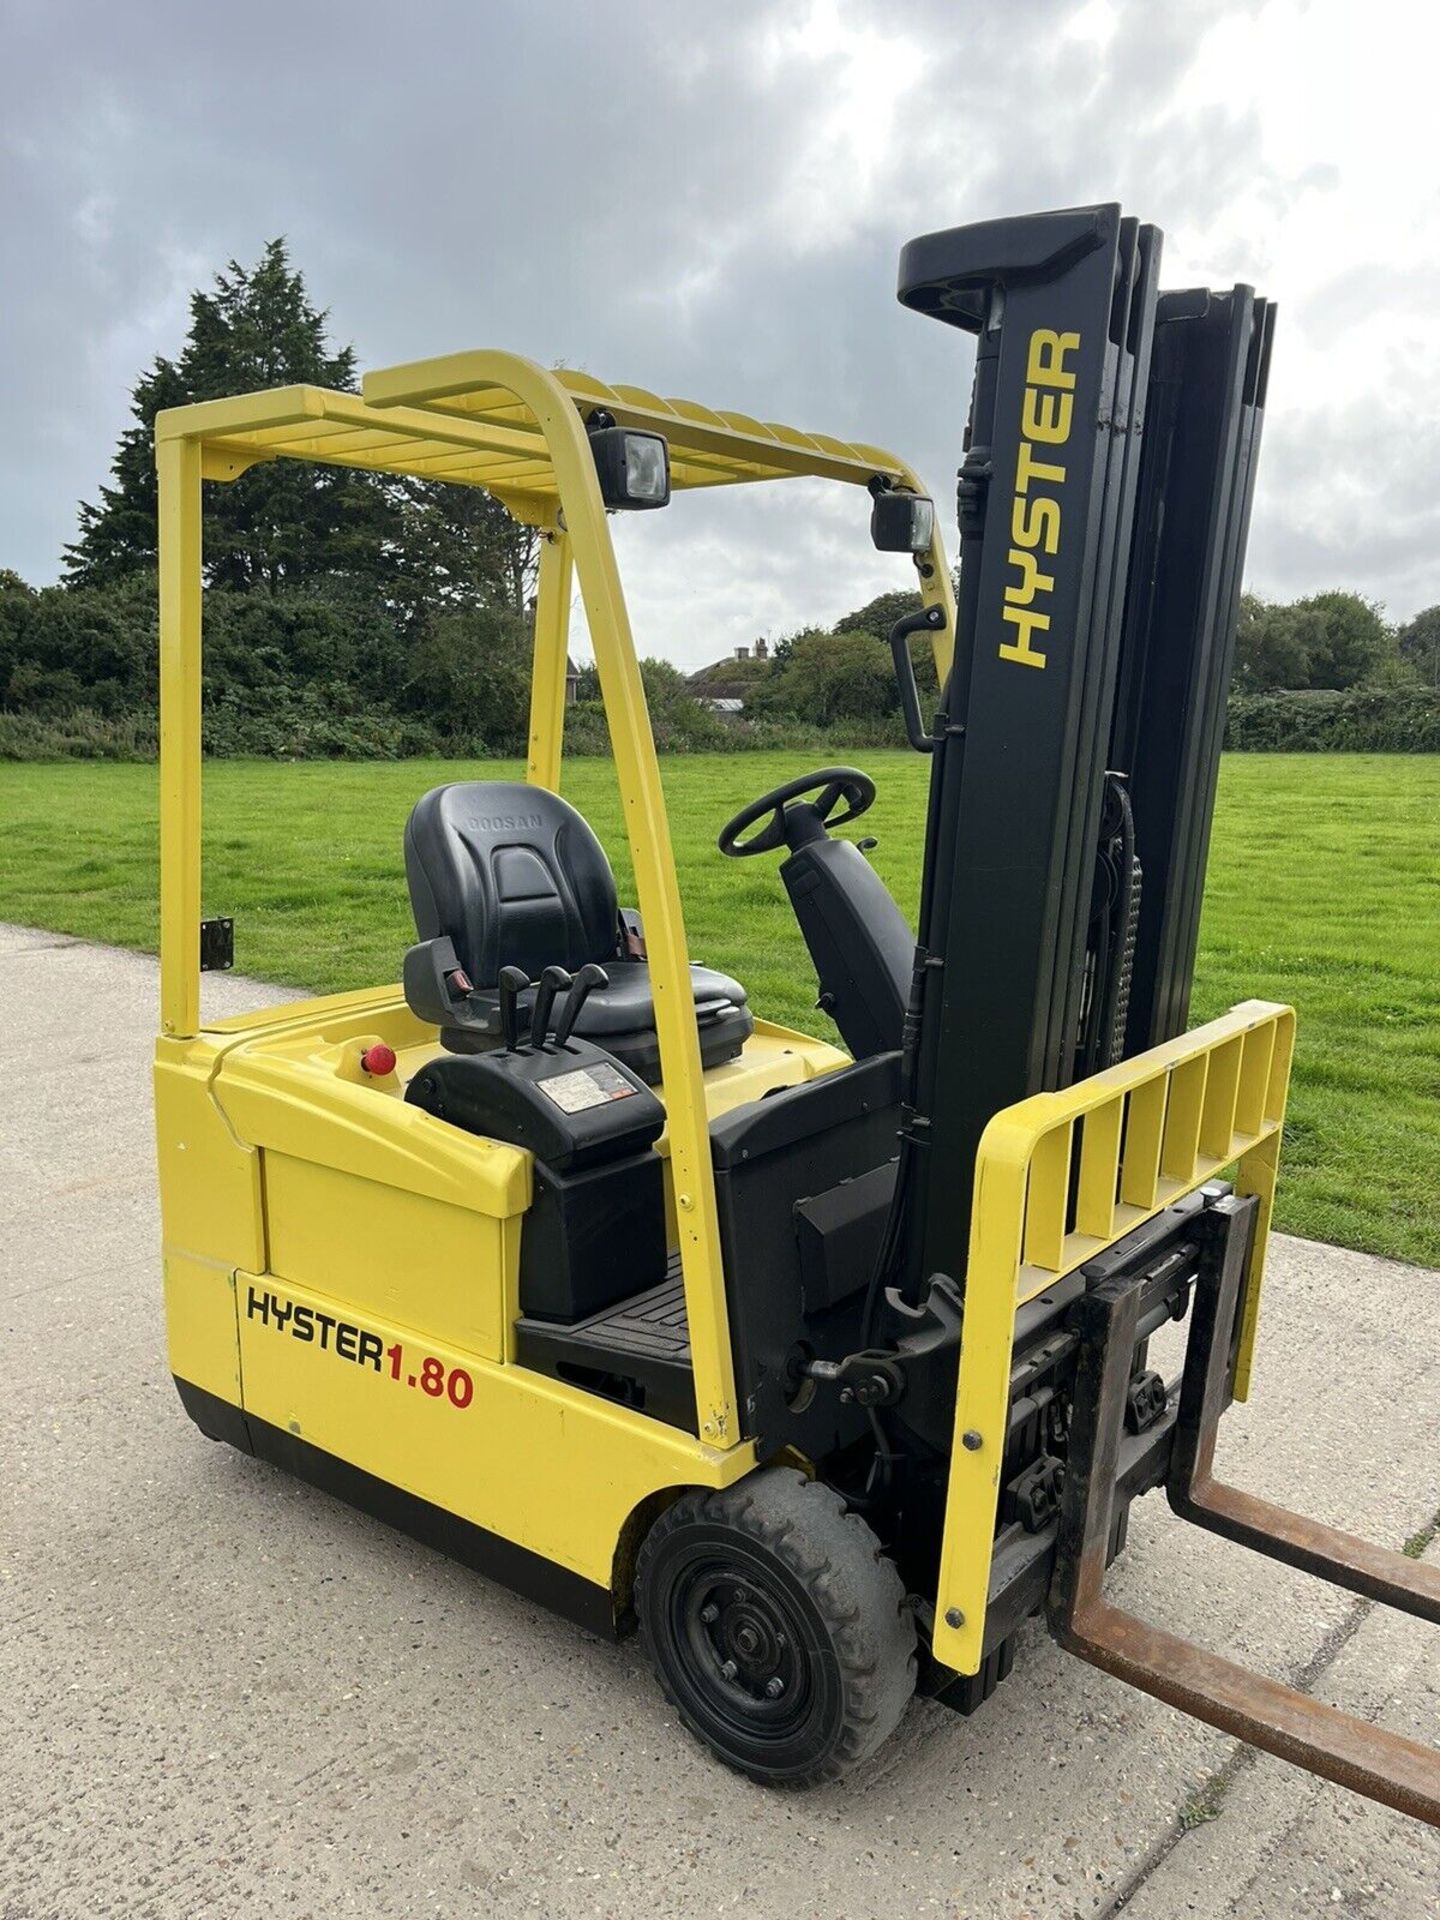 HYSTER, 1.8 Tonne Electric Forklift Truck (Container Spec) - Image 2 of 6